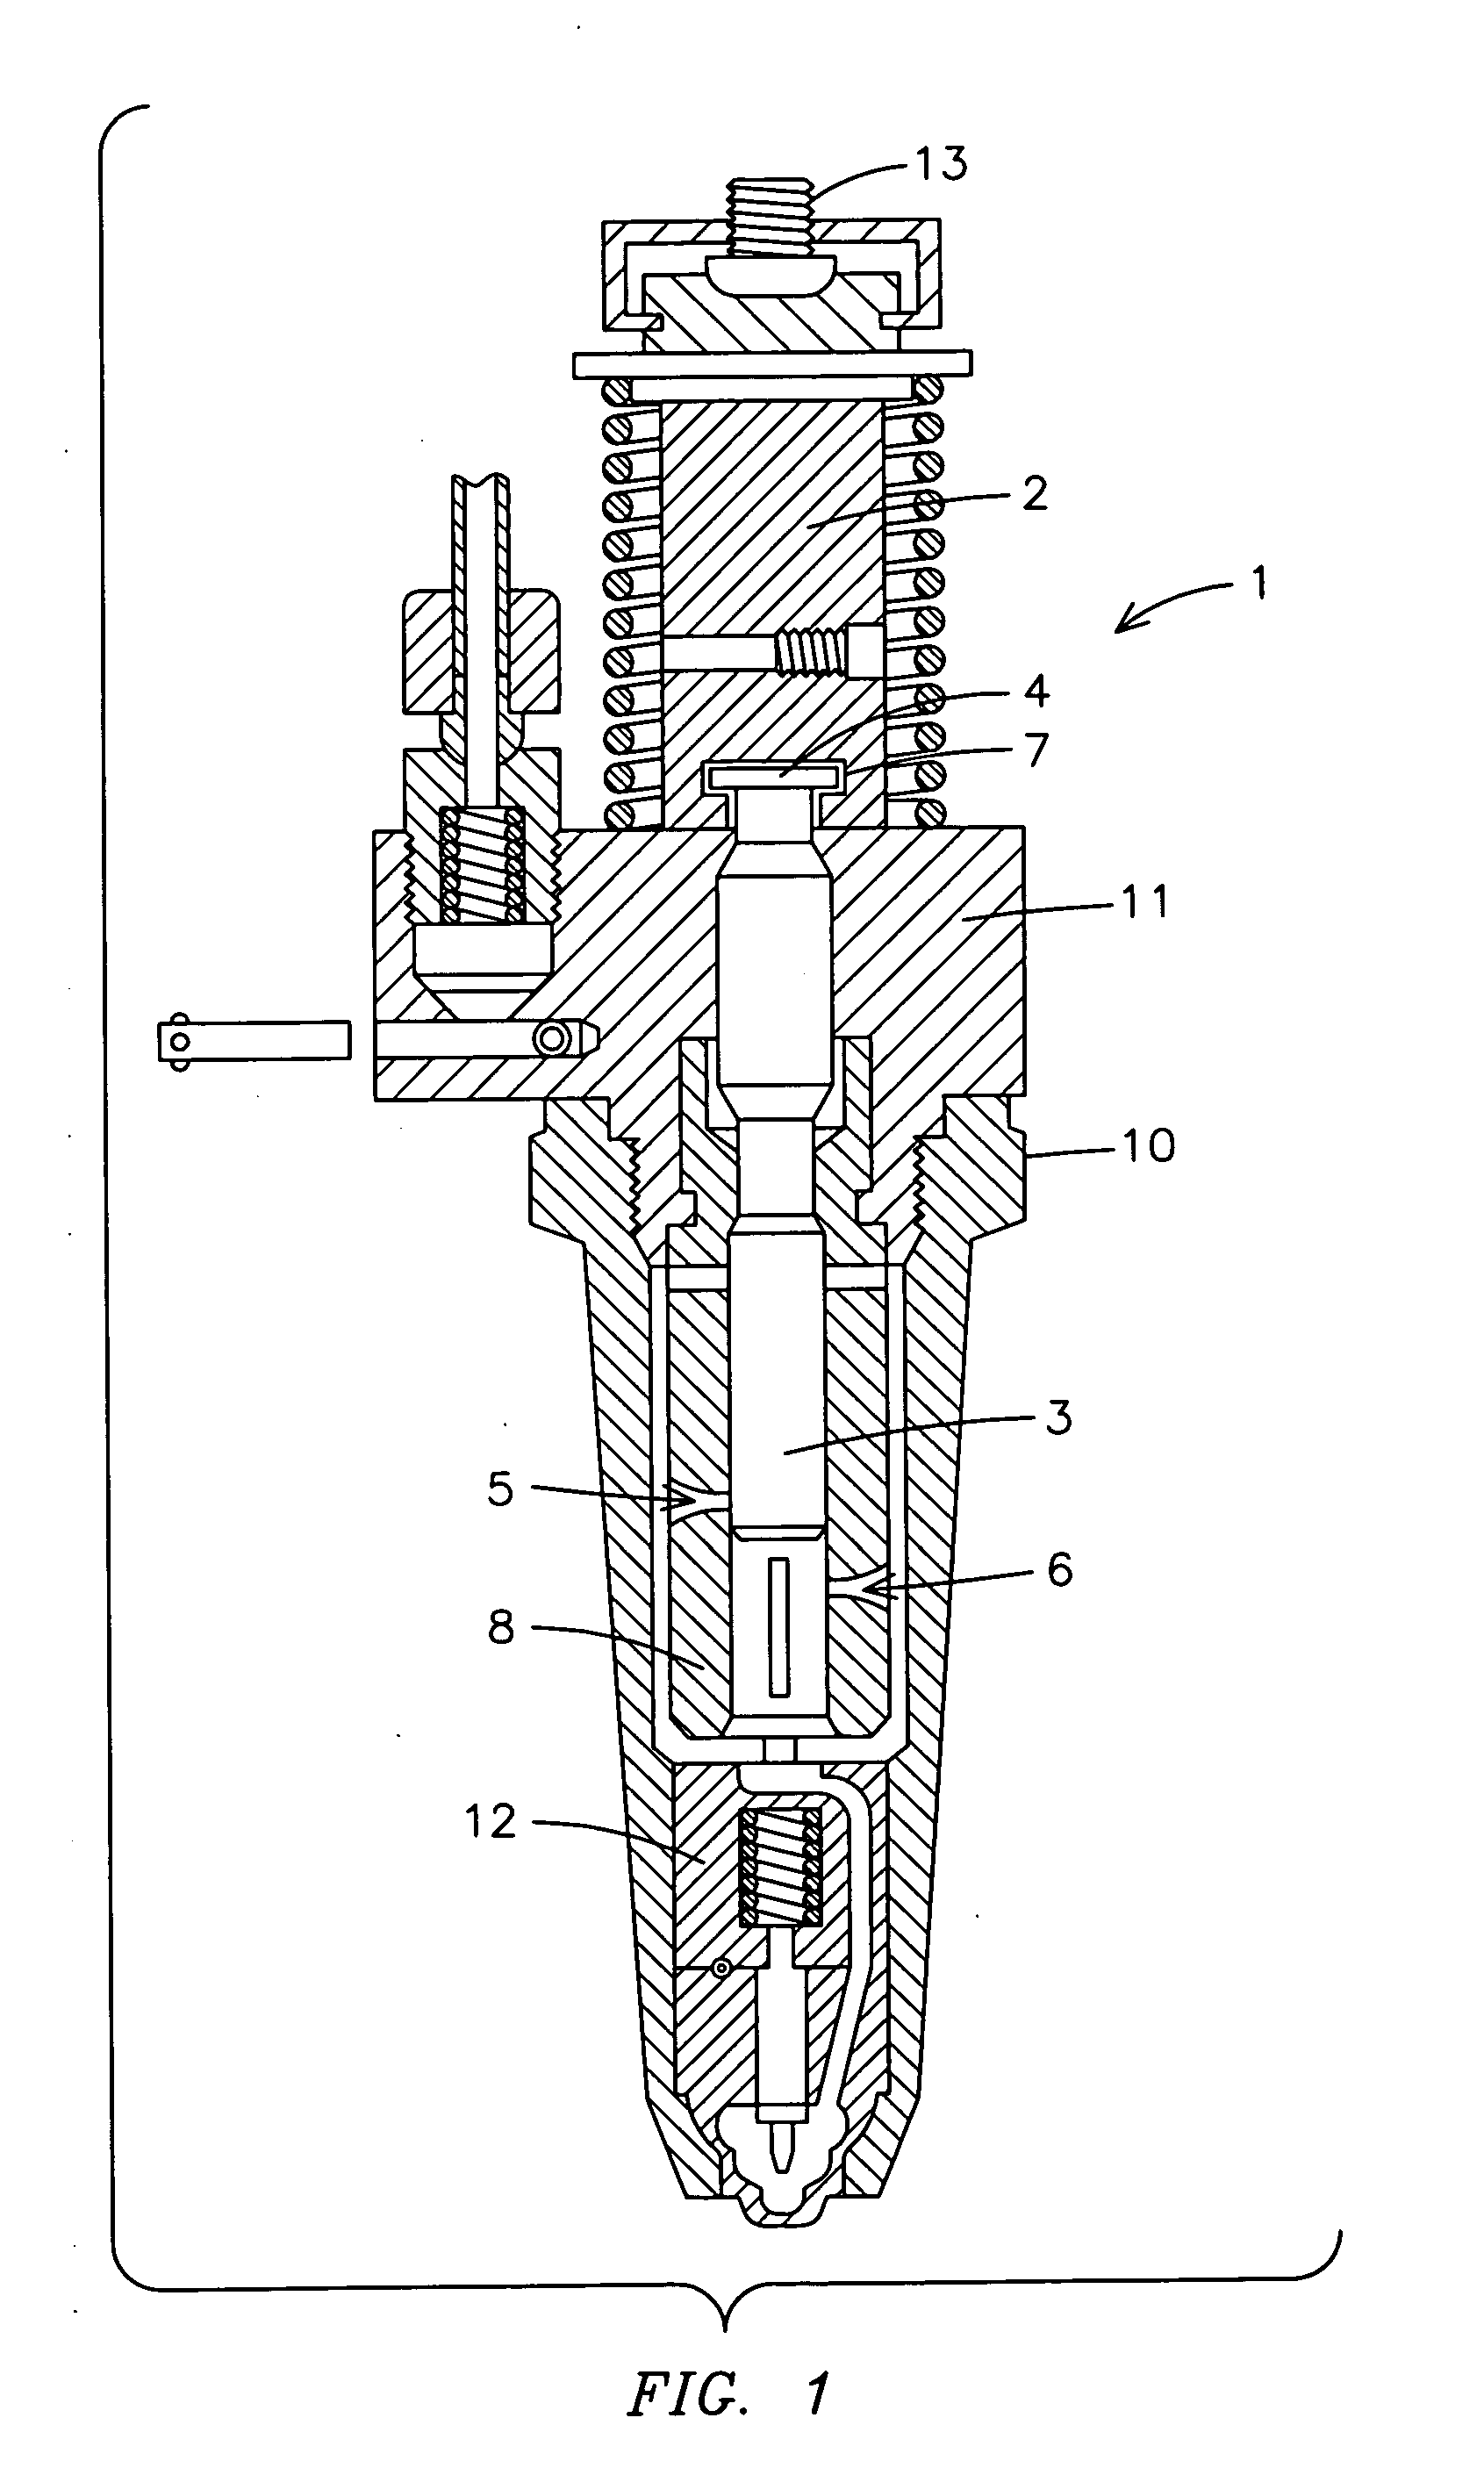 Method of retarding injection timing of mechanical unit injectors using a modified pump barrel